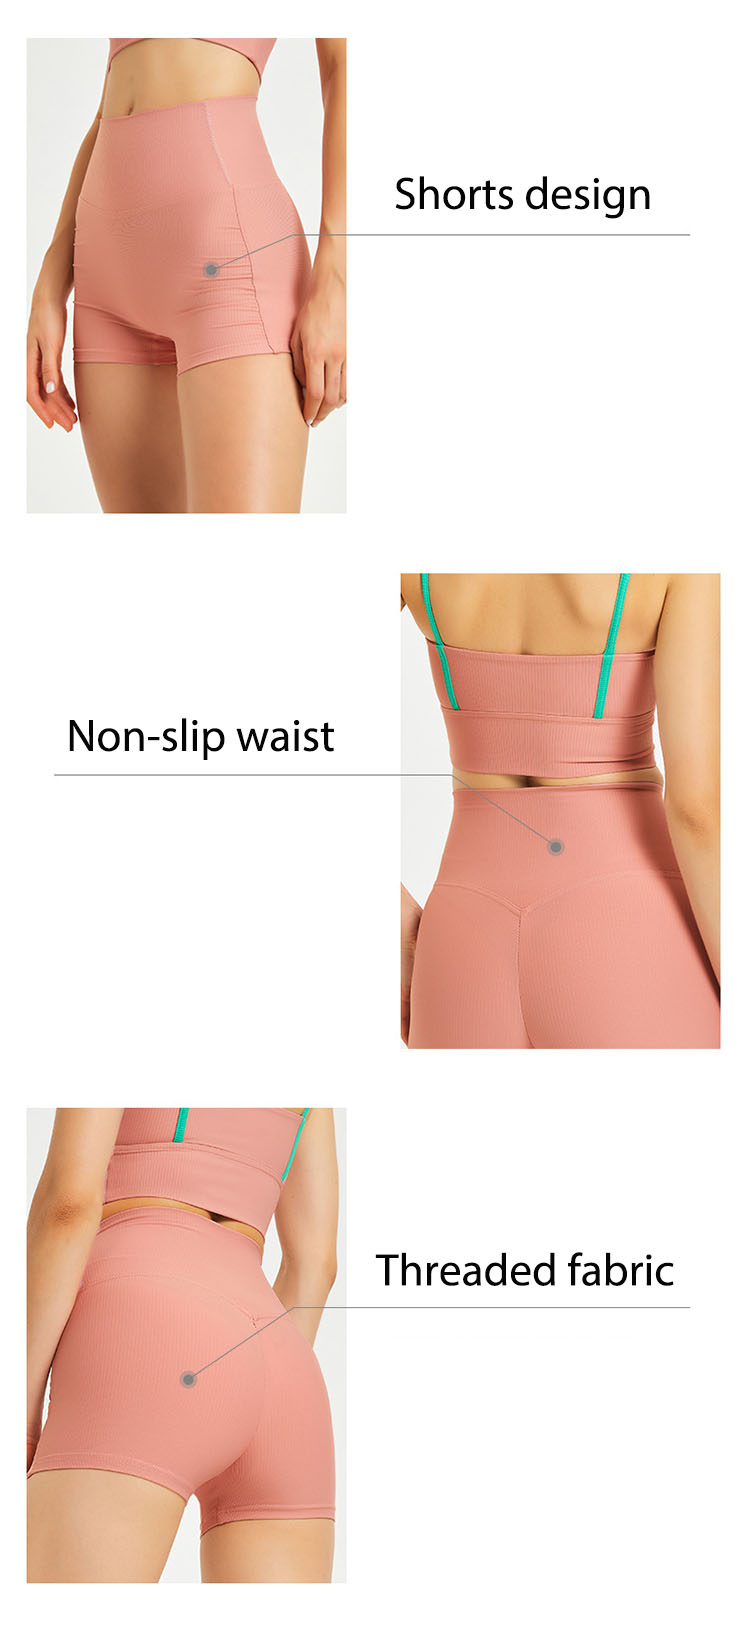 The non-slip waistband design is used to wrap it securely without being tight